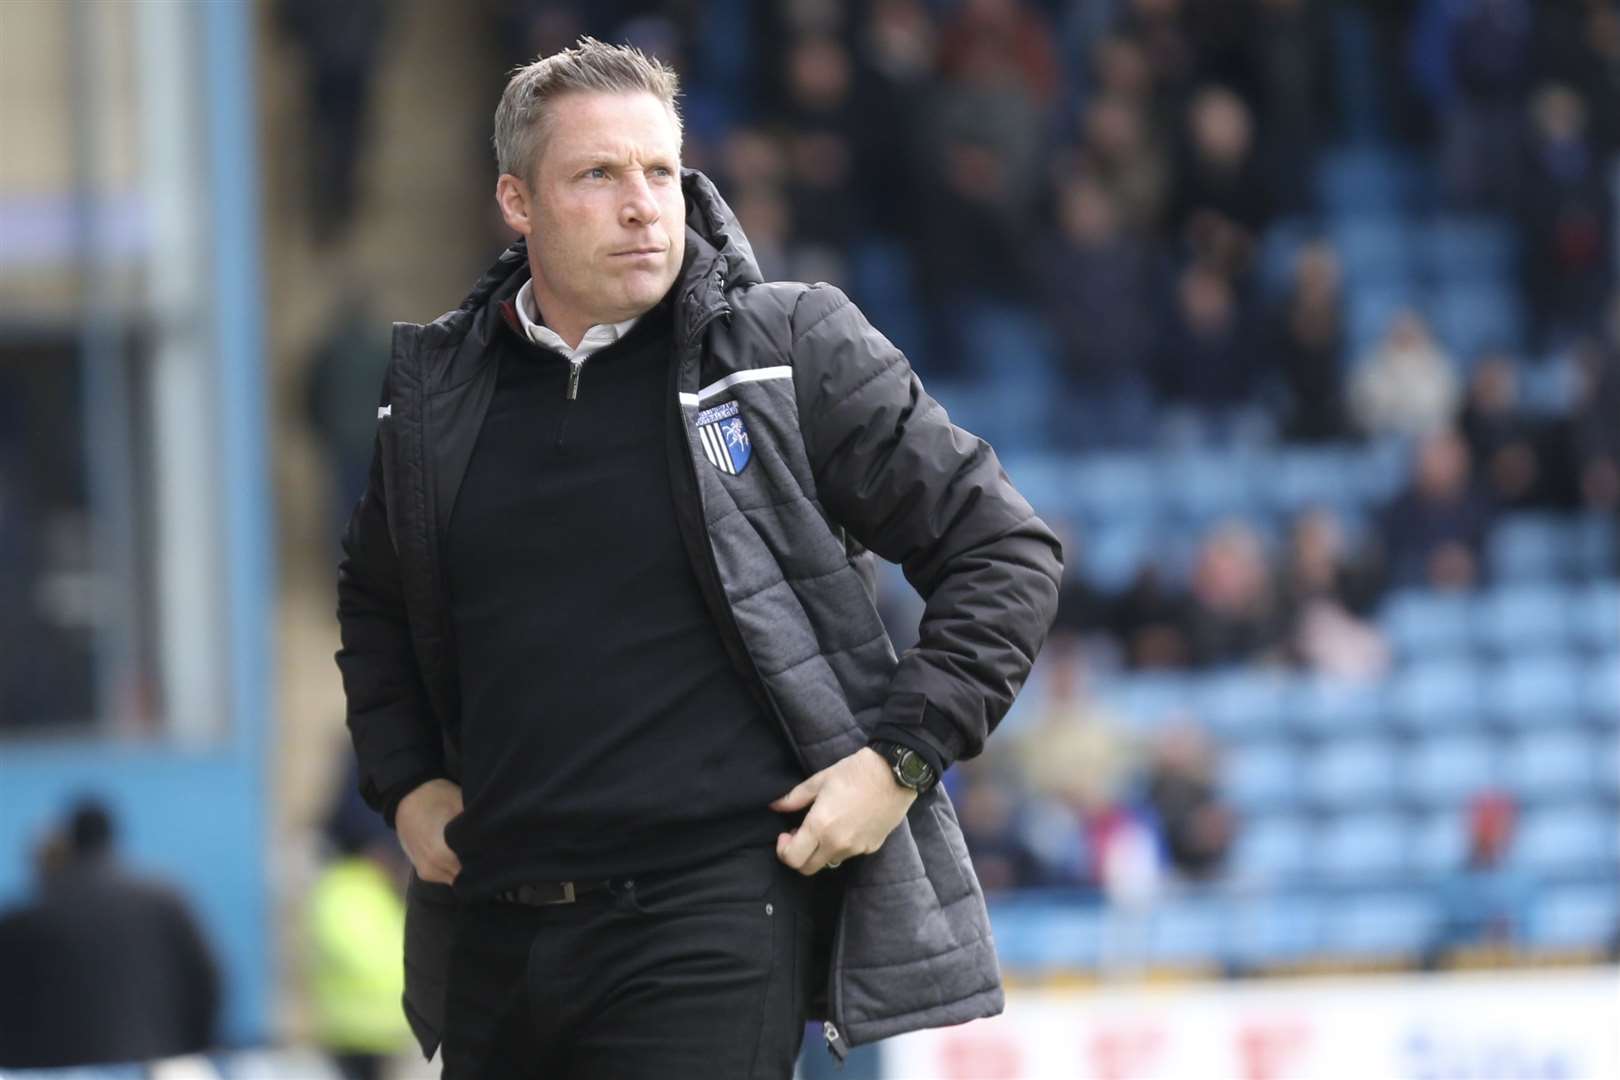 Gillingham manager Neil Harris has a new man heading up his recruitment department